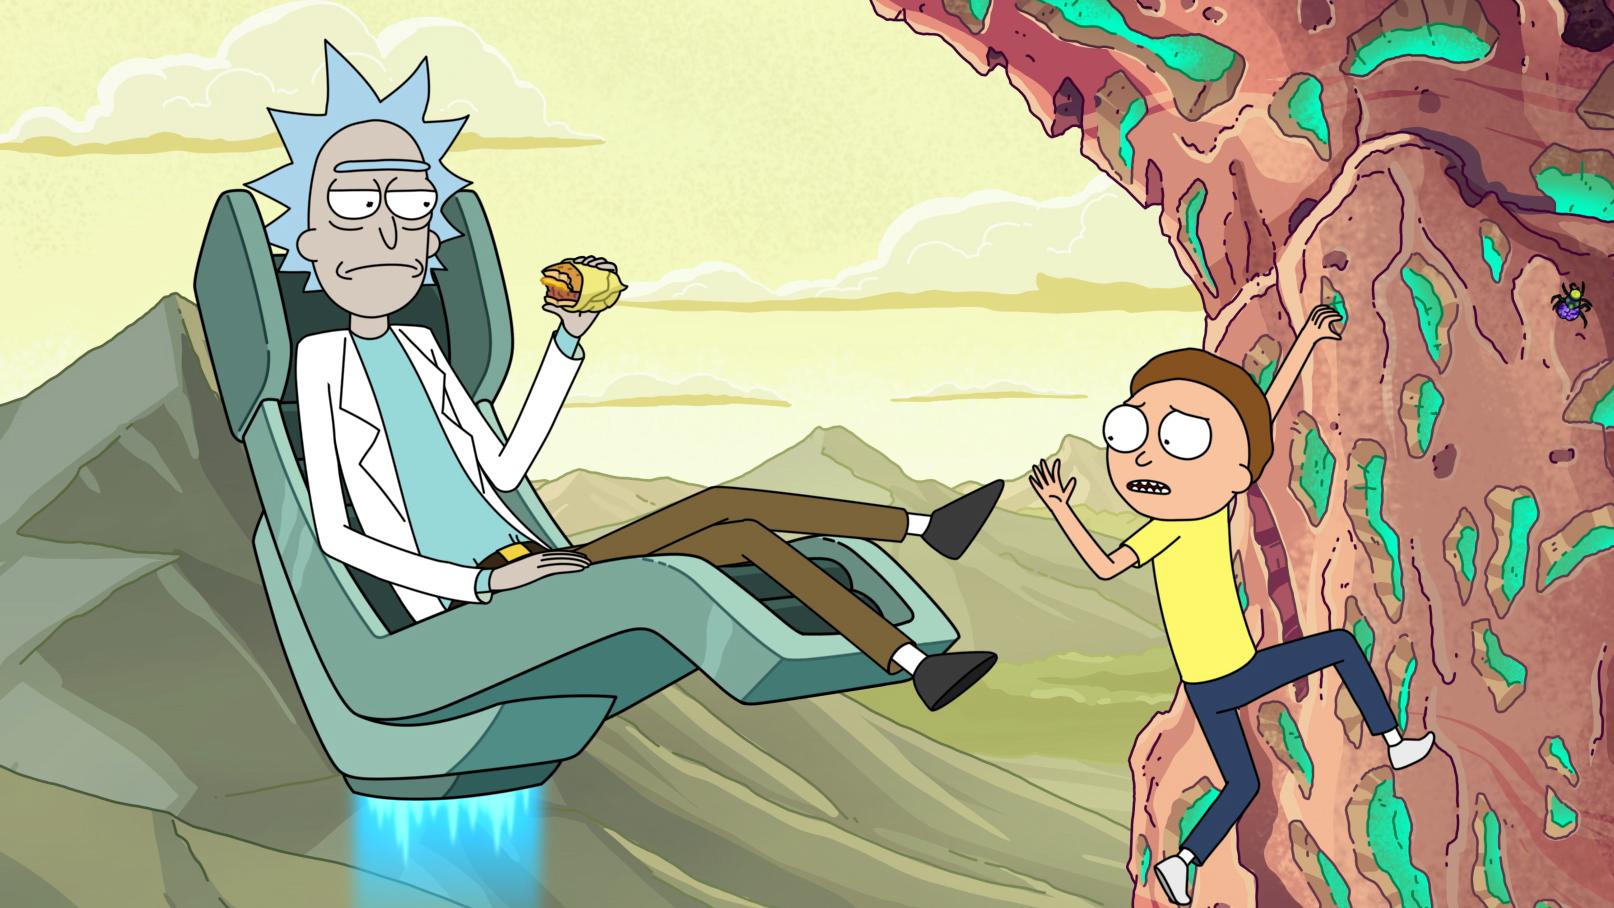 Rick and Morty: Season 4 Overview